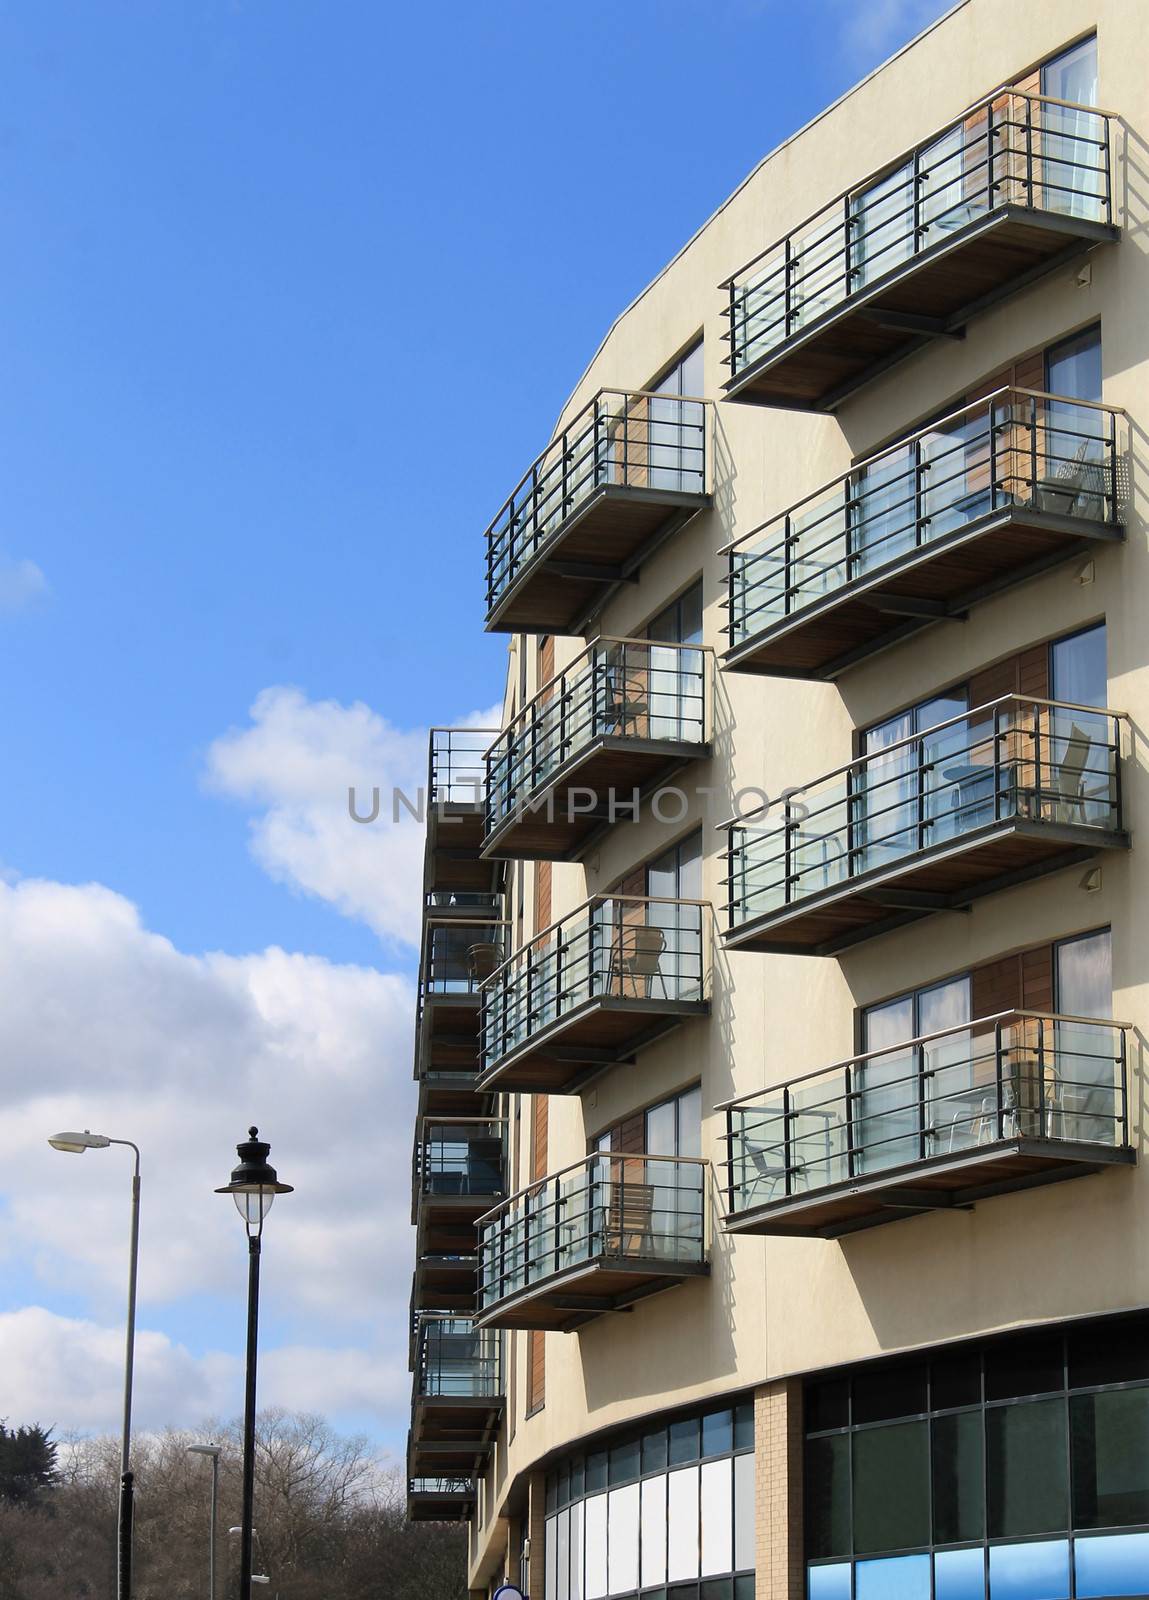 Exterior of modern apartment building with cloudscape background.